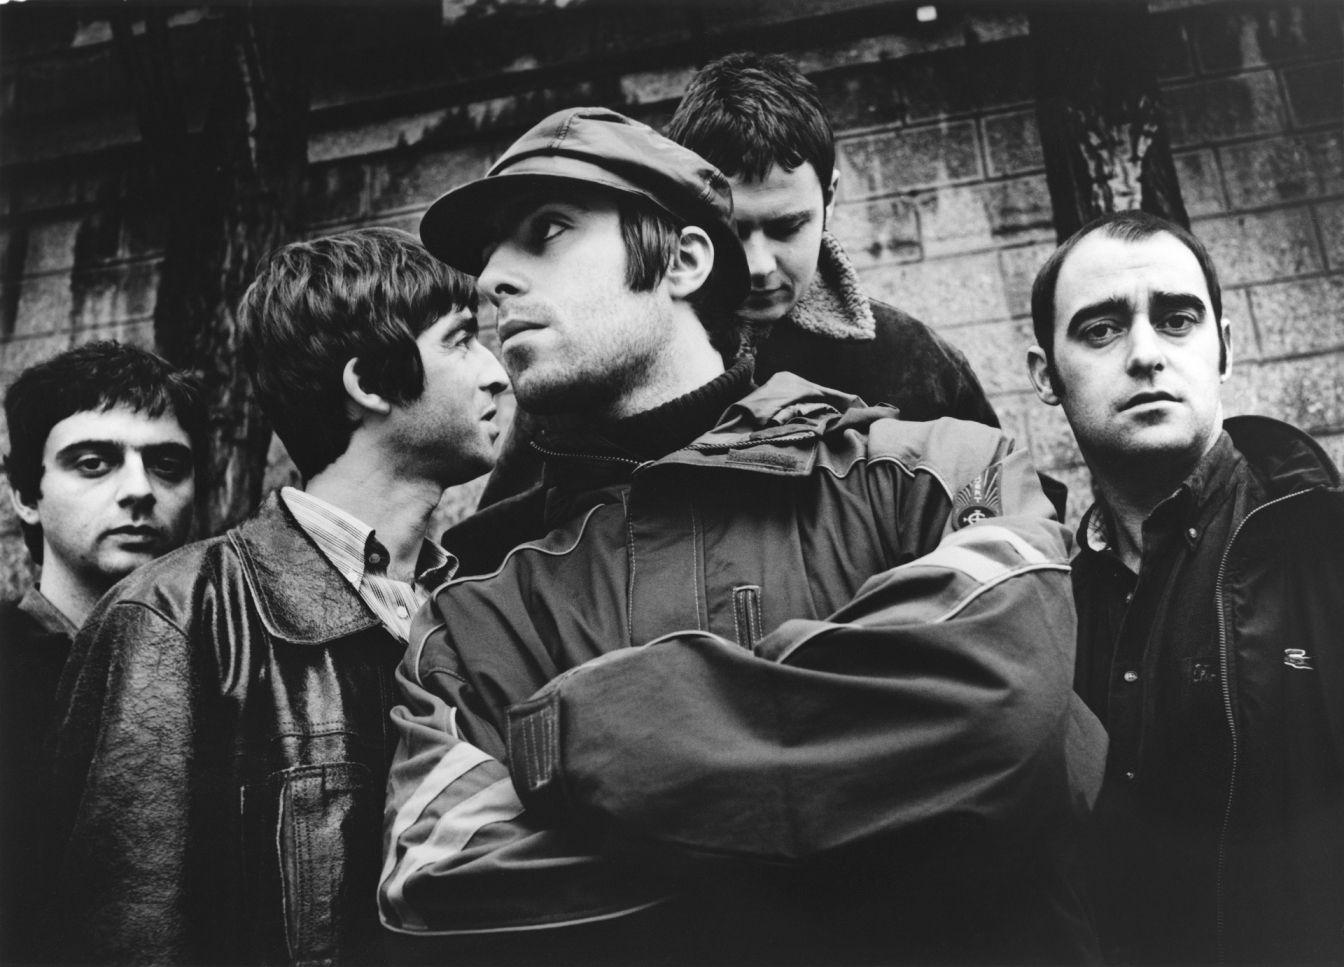 OASIS, formed in manchester (1991). Liam Gallagher is the coolest